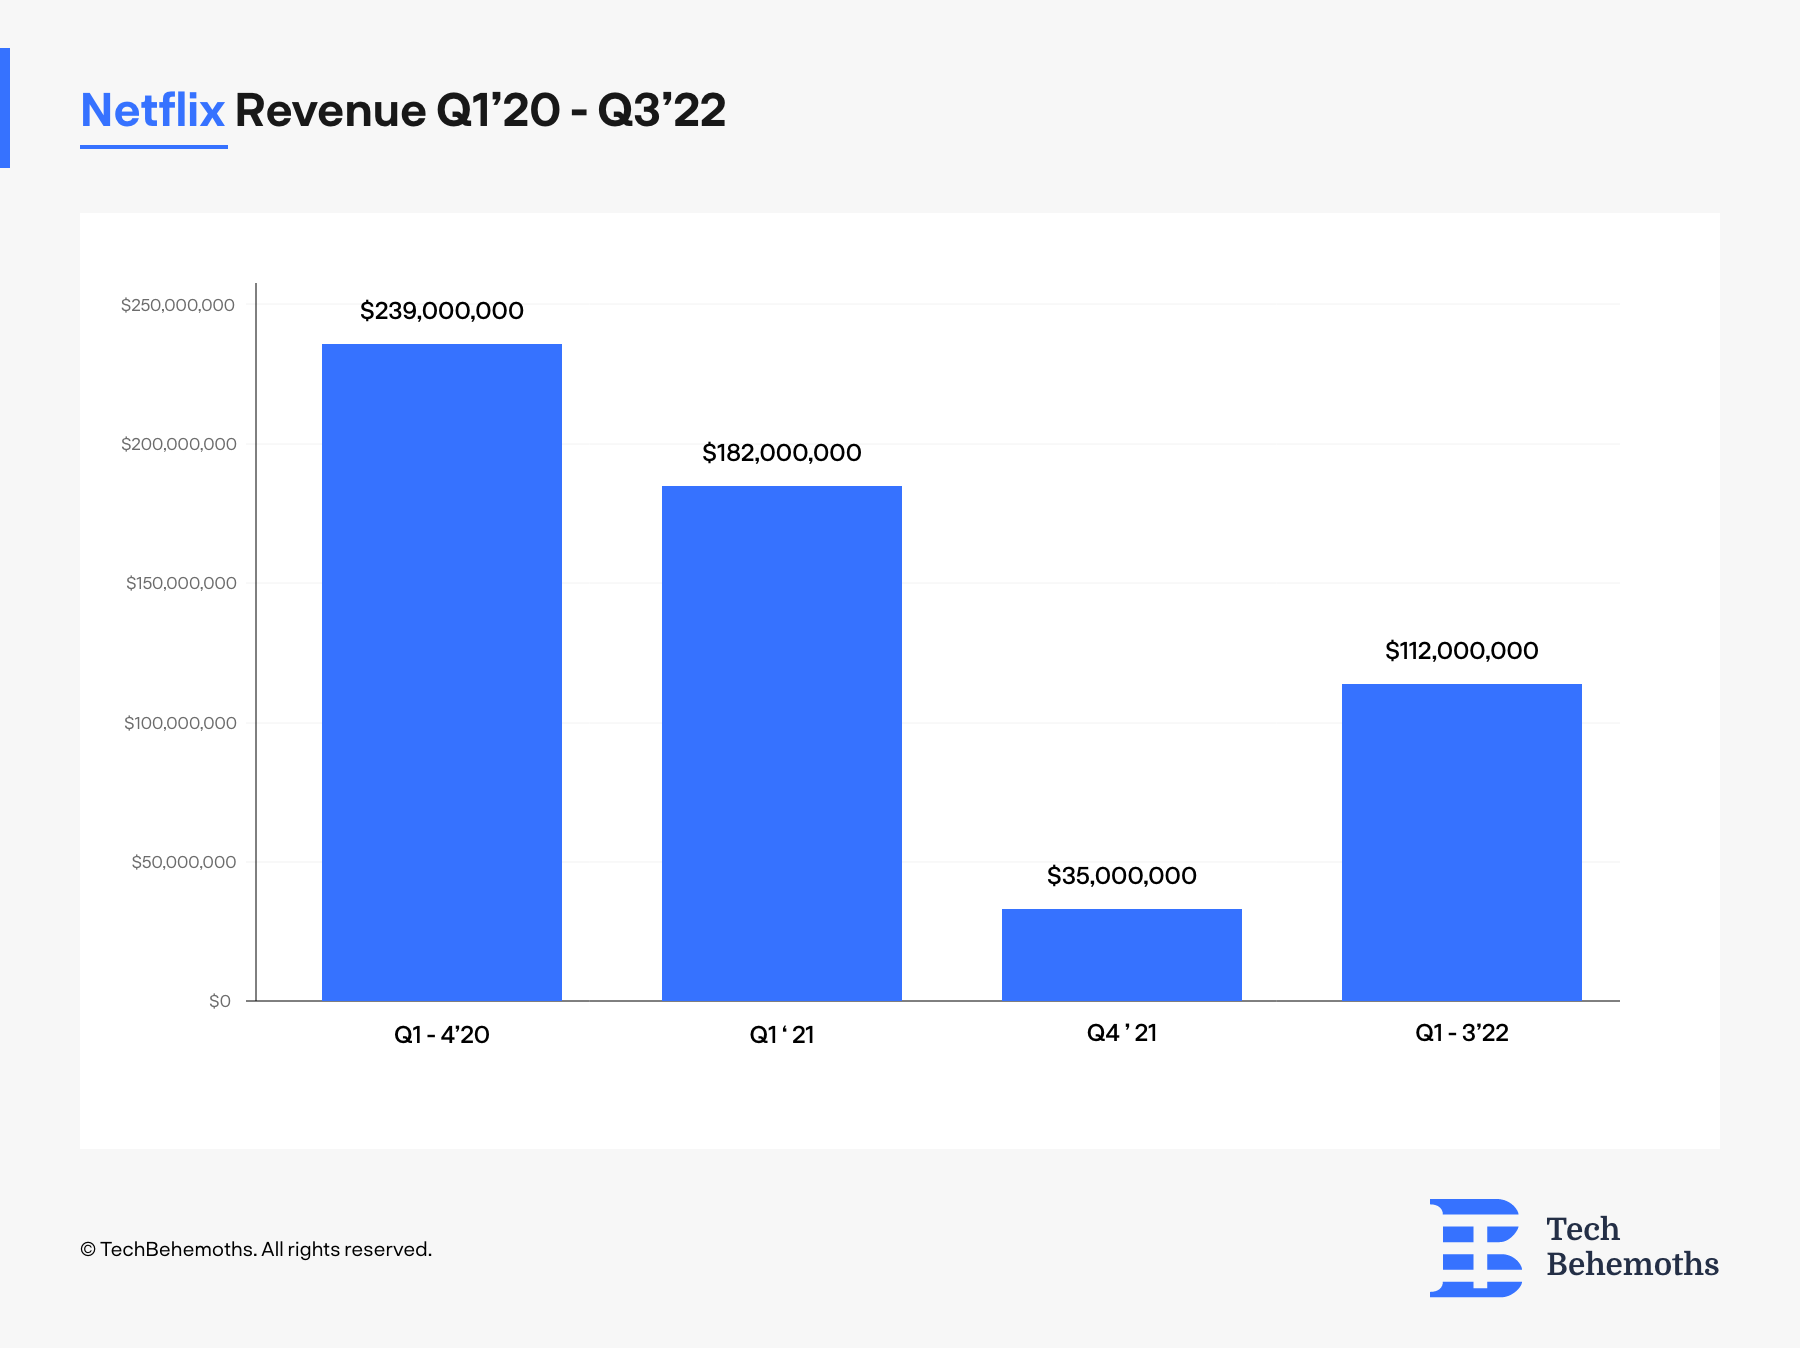 Netflix revenue from DVD sales in the US -between Q1'20 - Q3'22